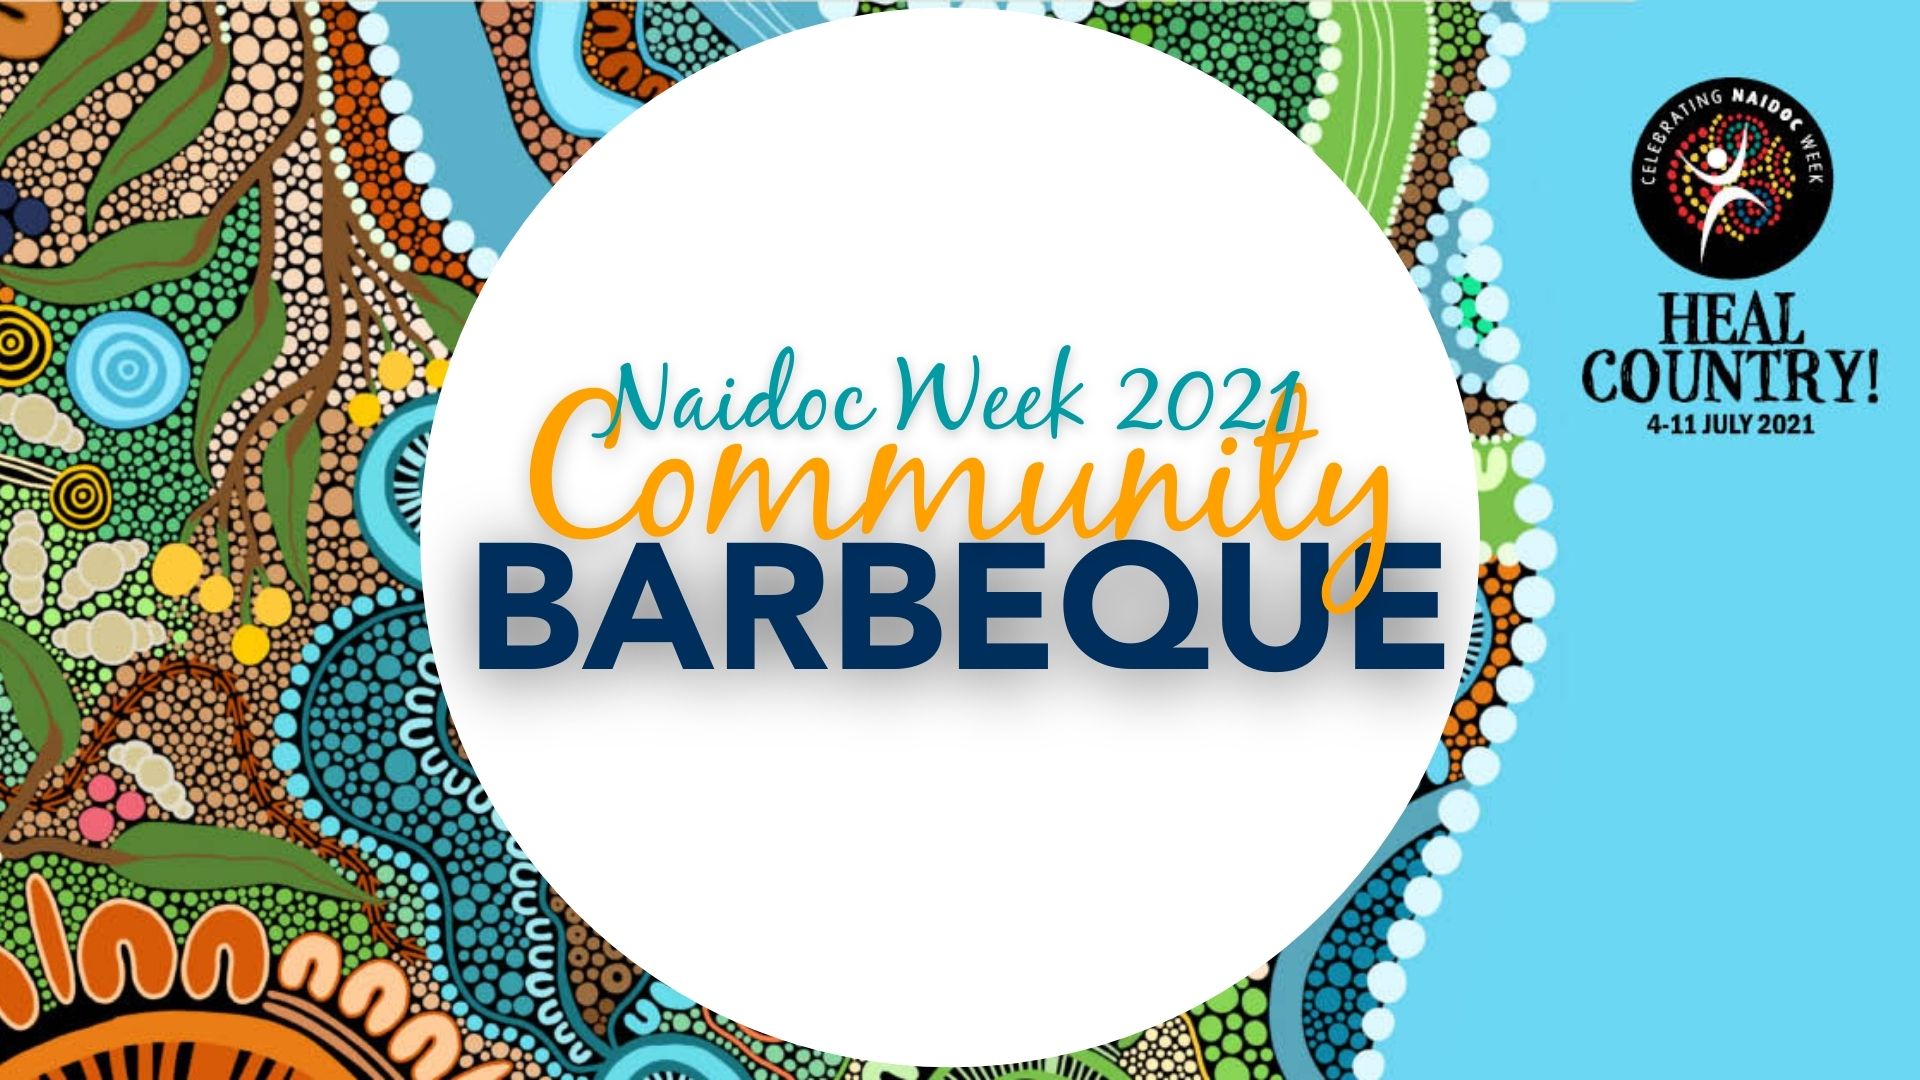 NAIDOC Week 2021 Community Barbeque - Heal Country!